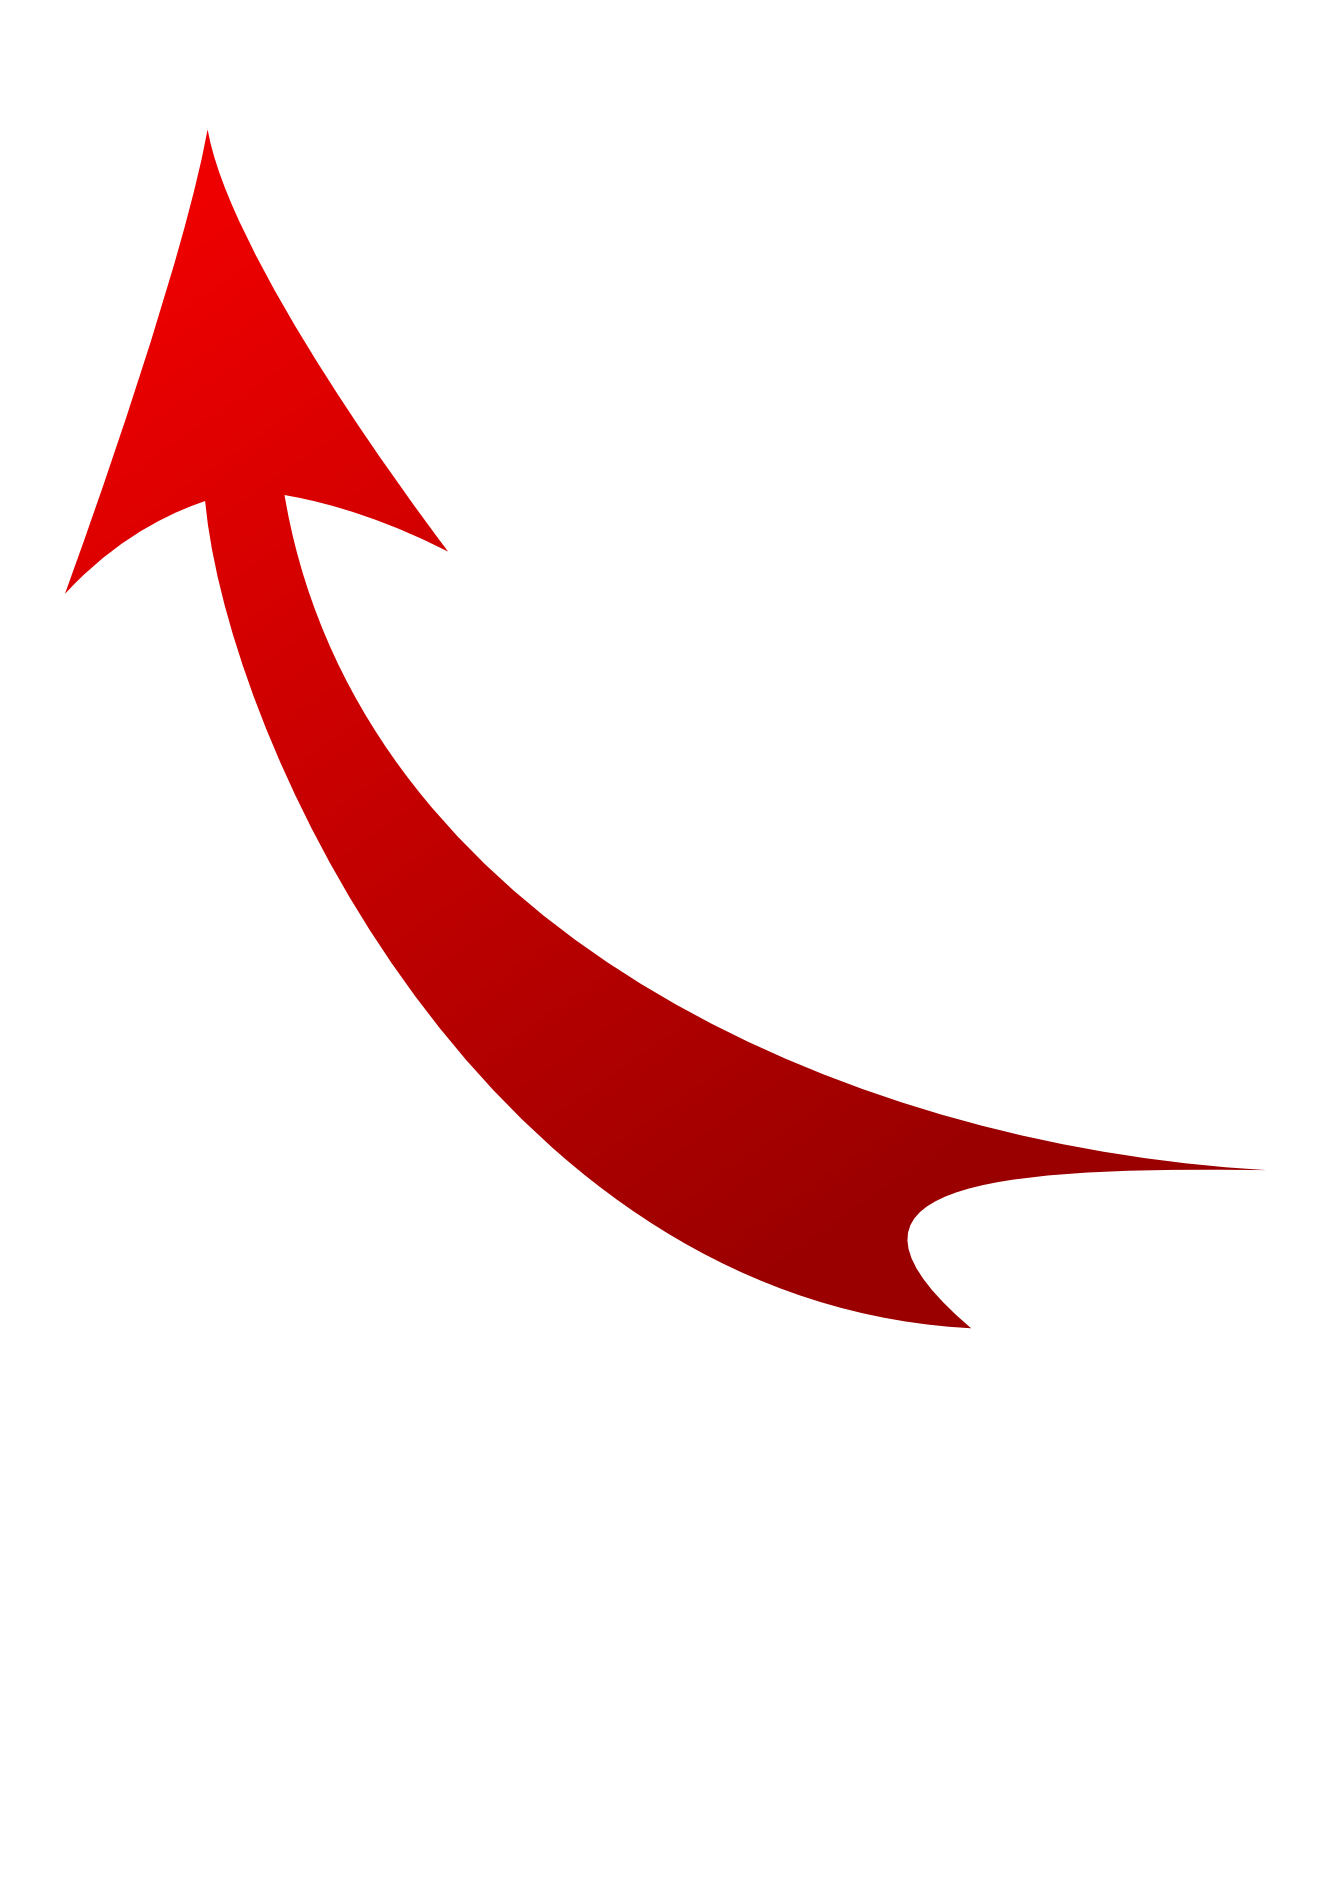 Red Arrow PNG Image File